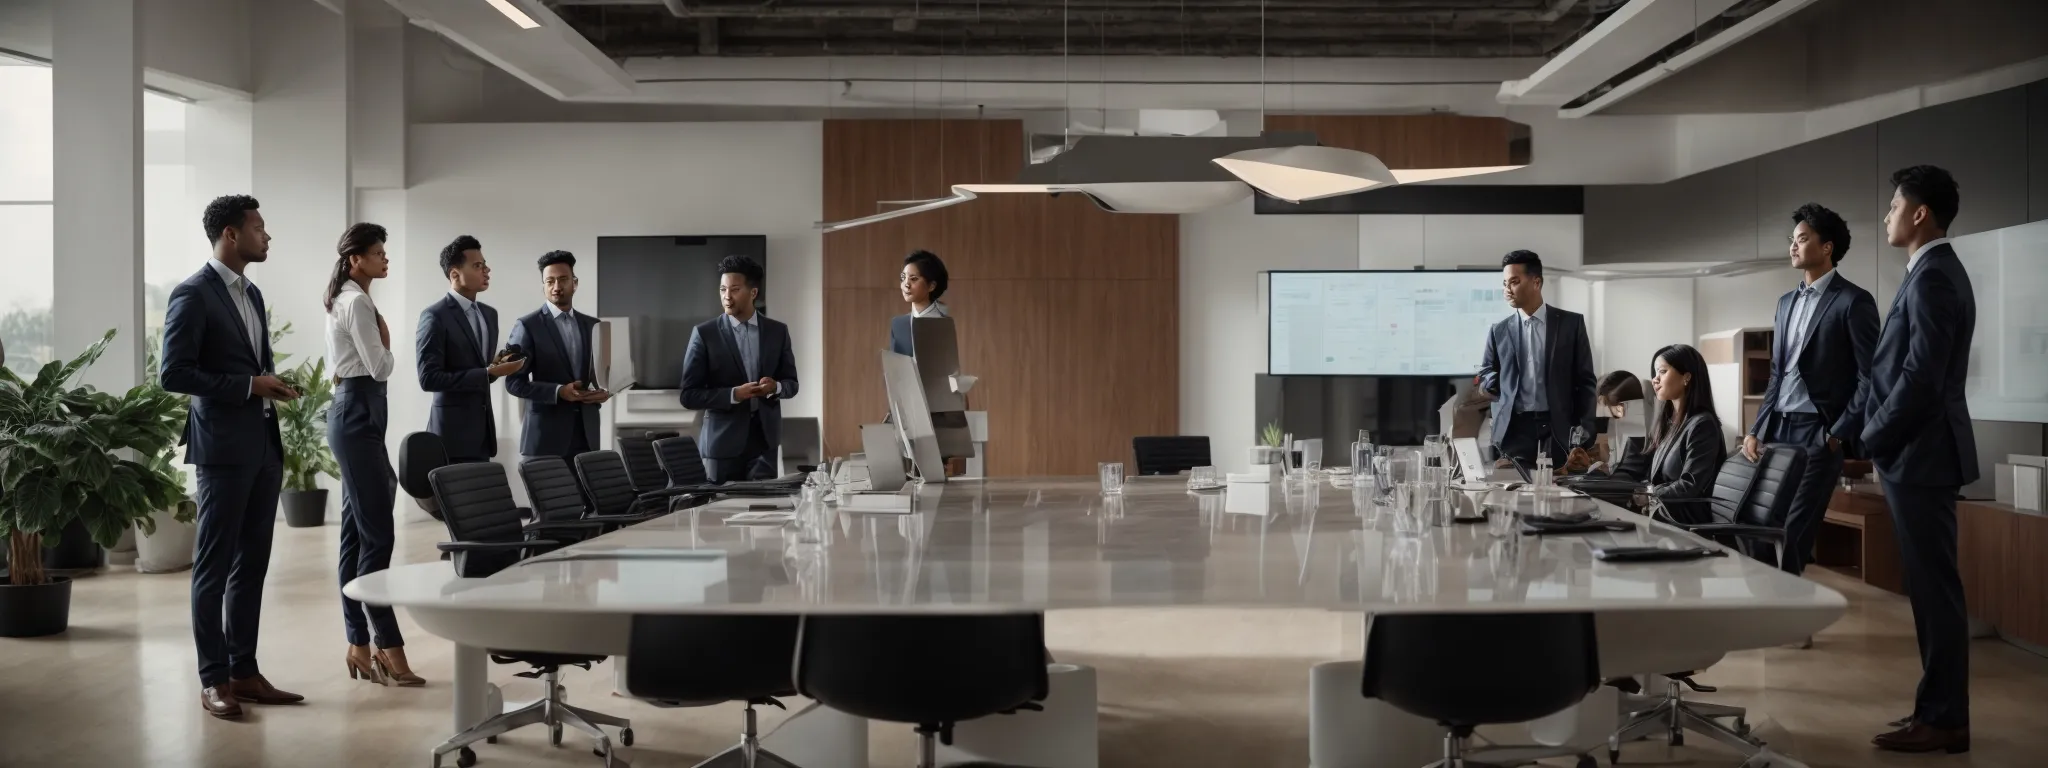 a group of professionals gathered around a modern conference table, engaging with a sleek, interactive display that simplifies project coordination.